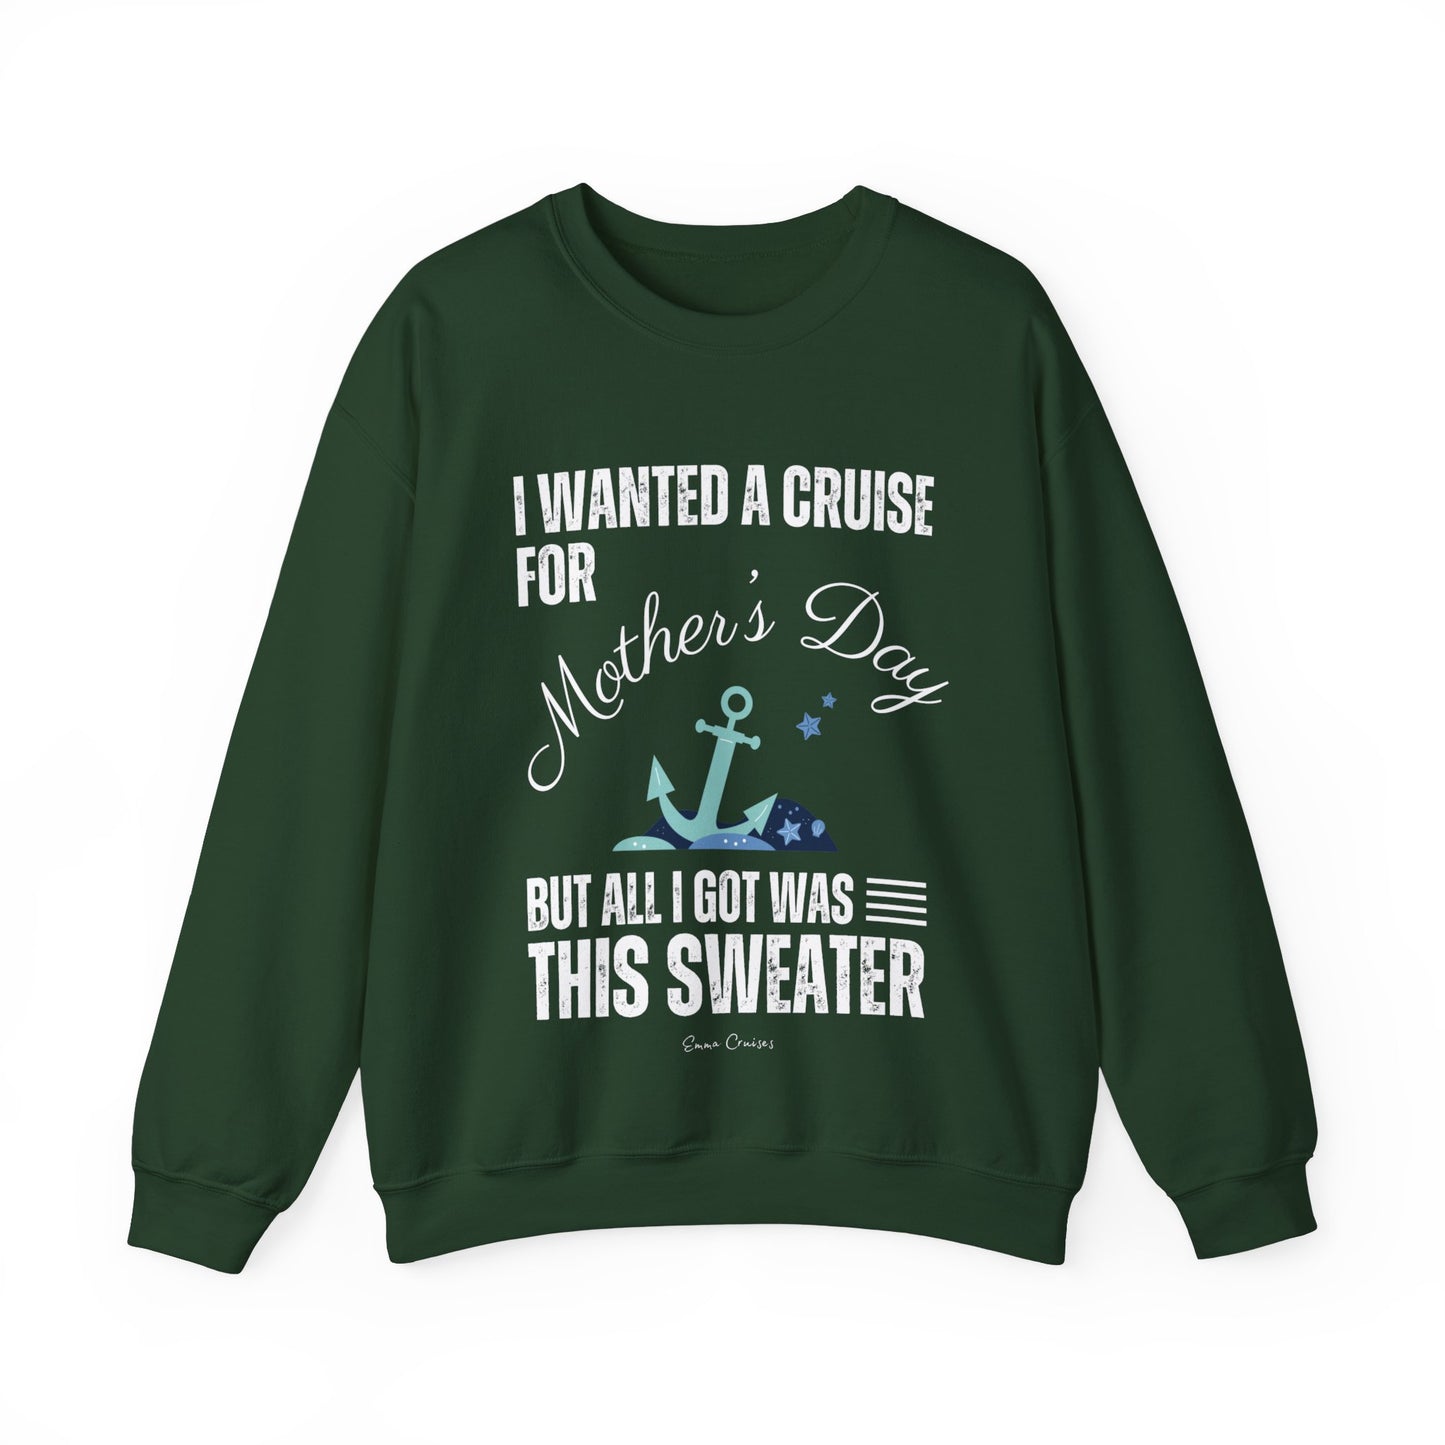 I Wanted a Cruise for Mother's Day - UNISEX Crewneck Sweatshirt